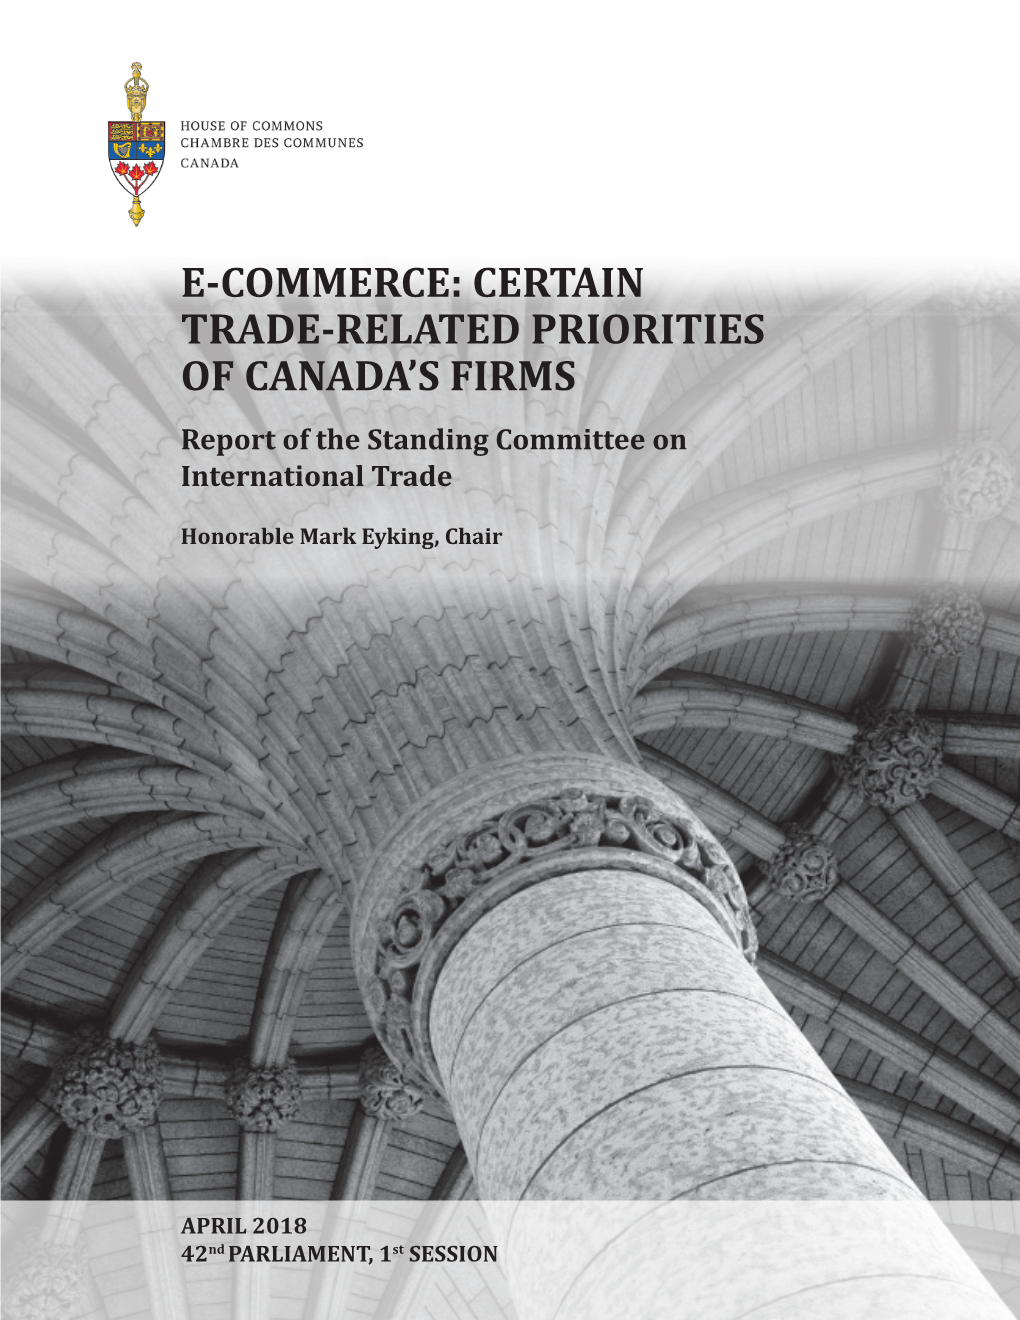 E-COMMERCE: CERTAIN TRADE-RELATED PRIORITIES of CANADA’S FIRMS Report of the Standing Committee on International Trade